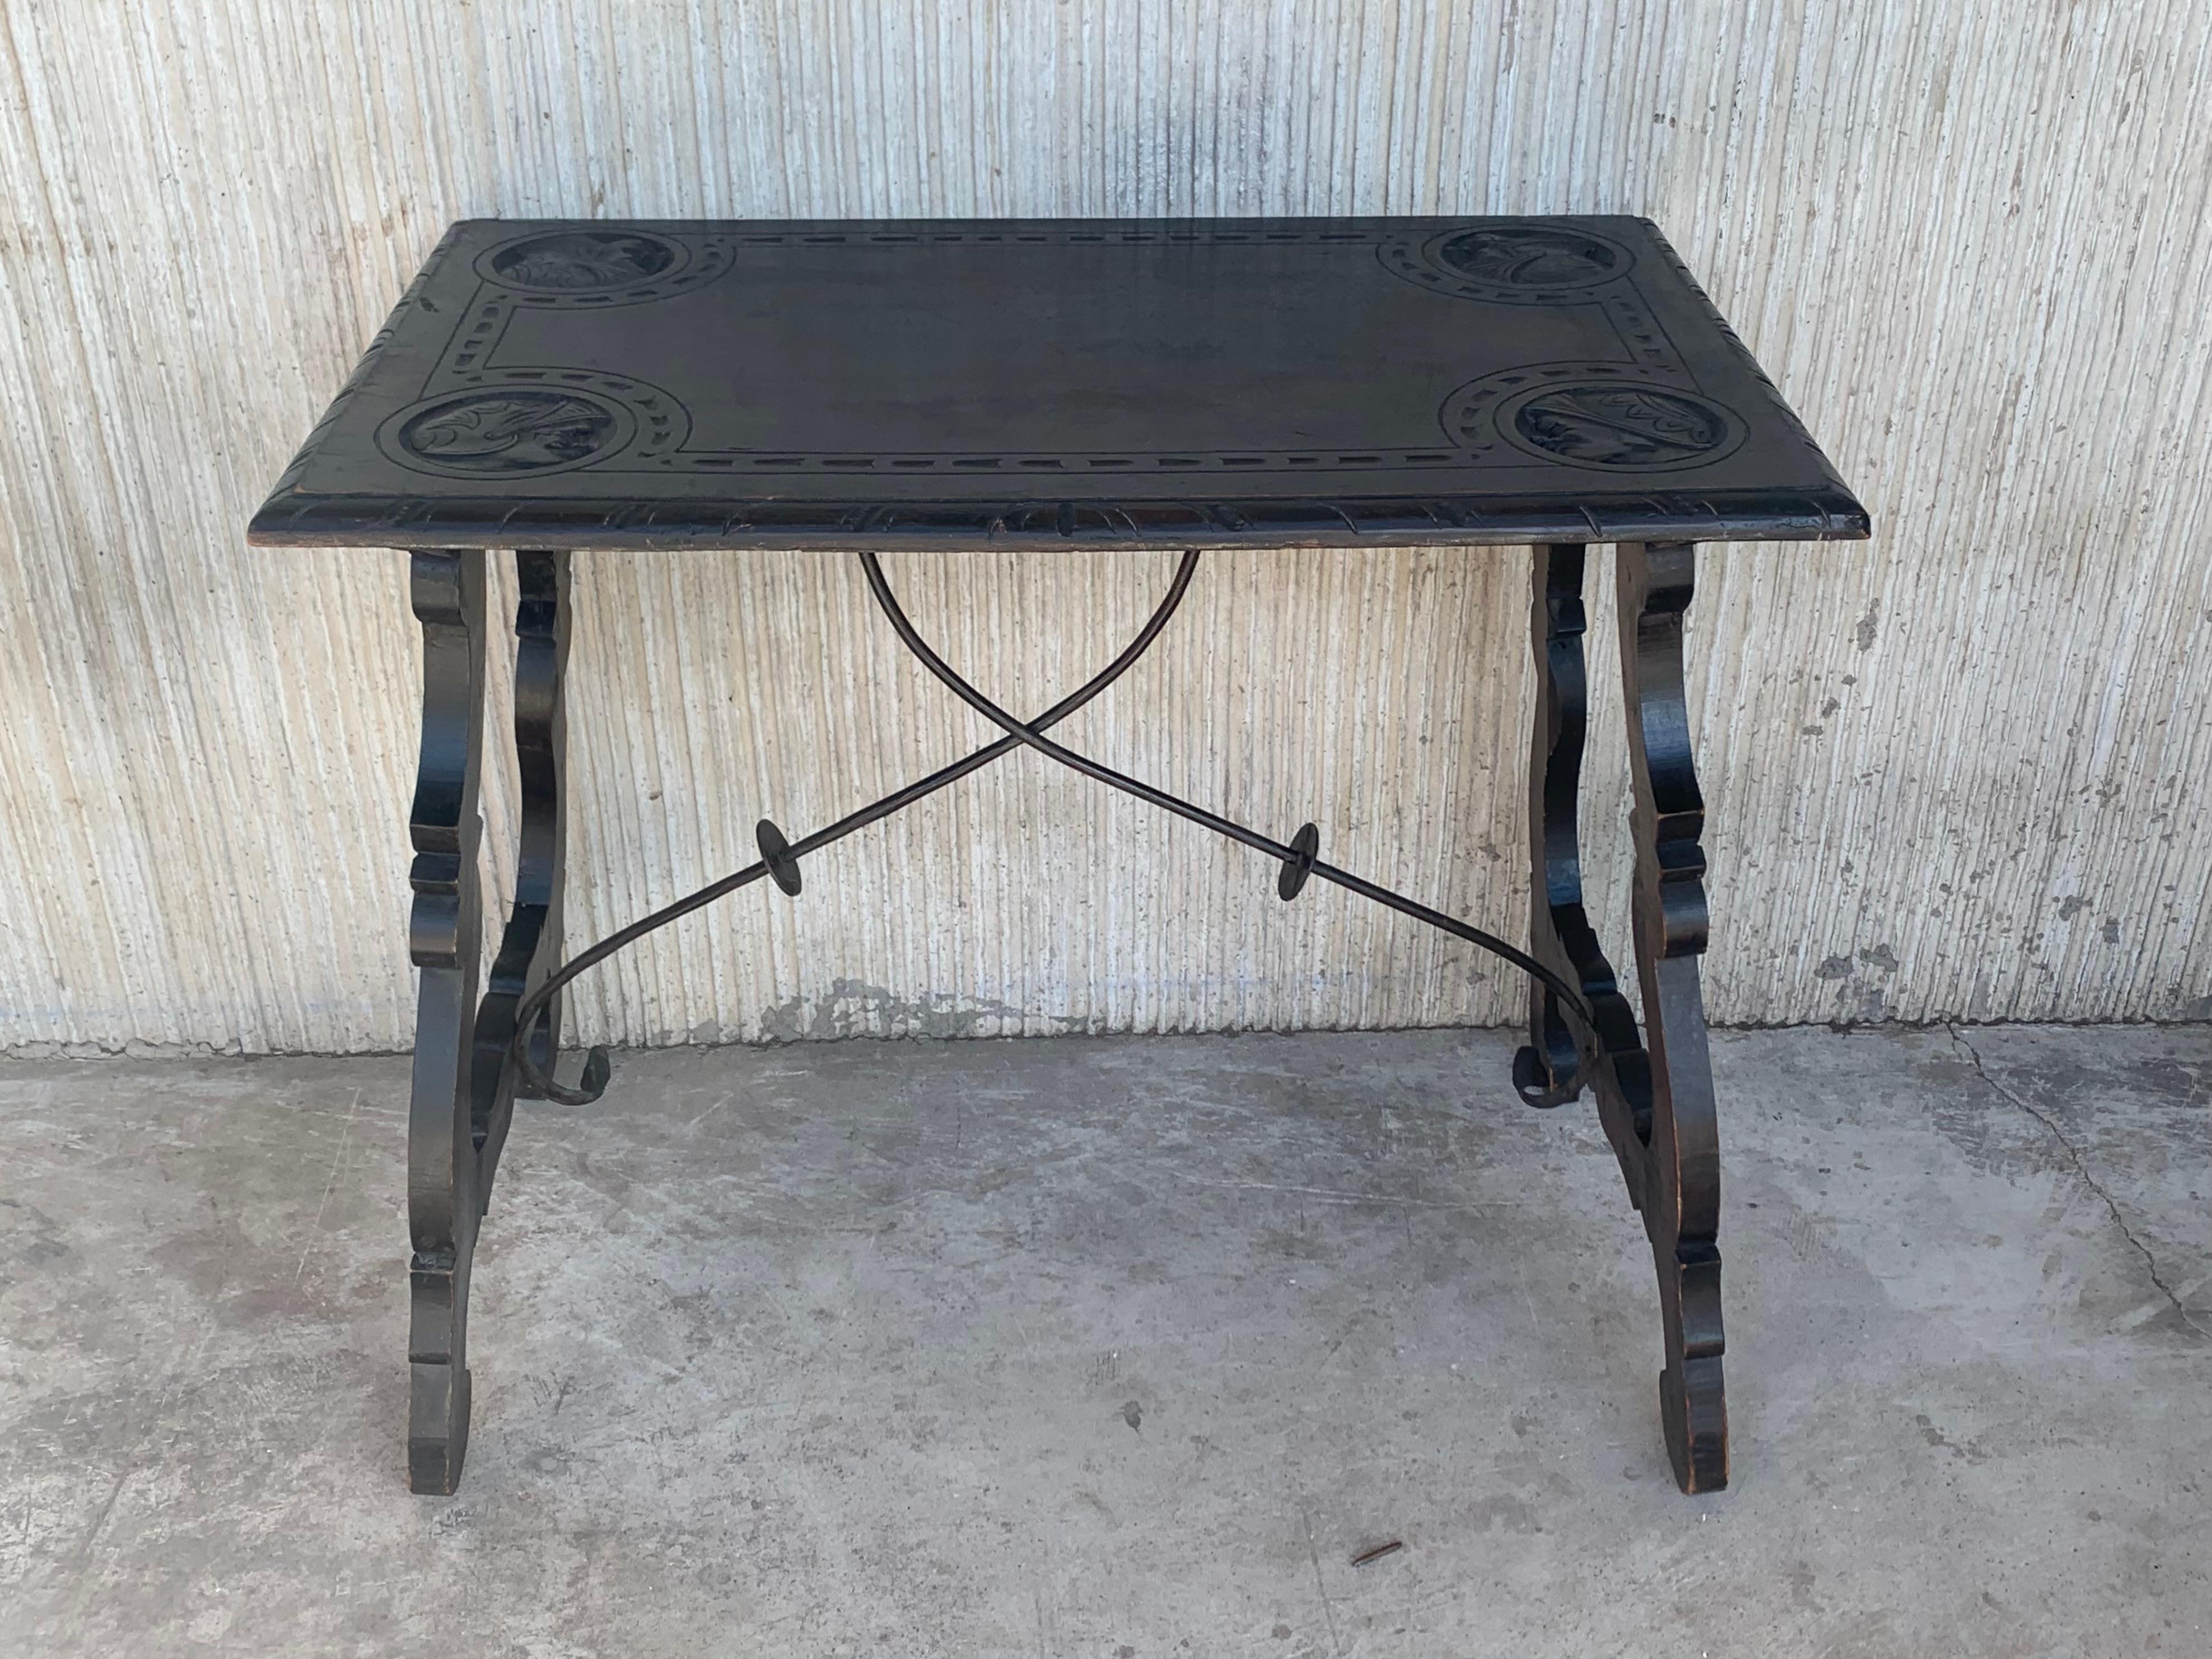 19th Century Spanish Baroque Side Table with Carved Top & Legs & Iron Stretchers In Good Condition For Sale In Miami, FL